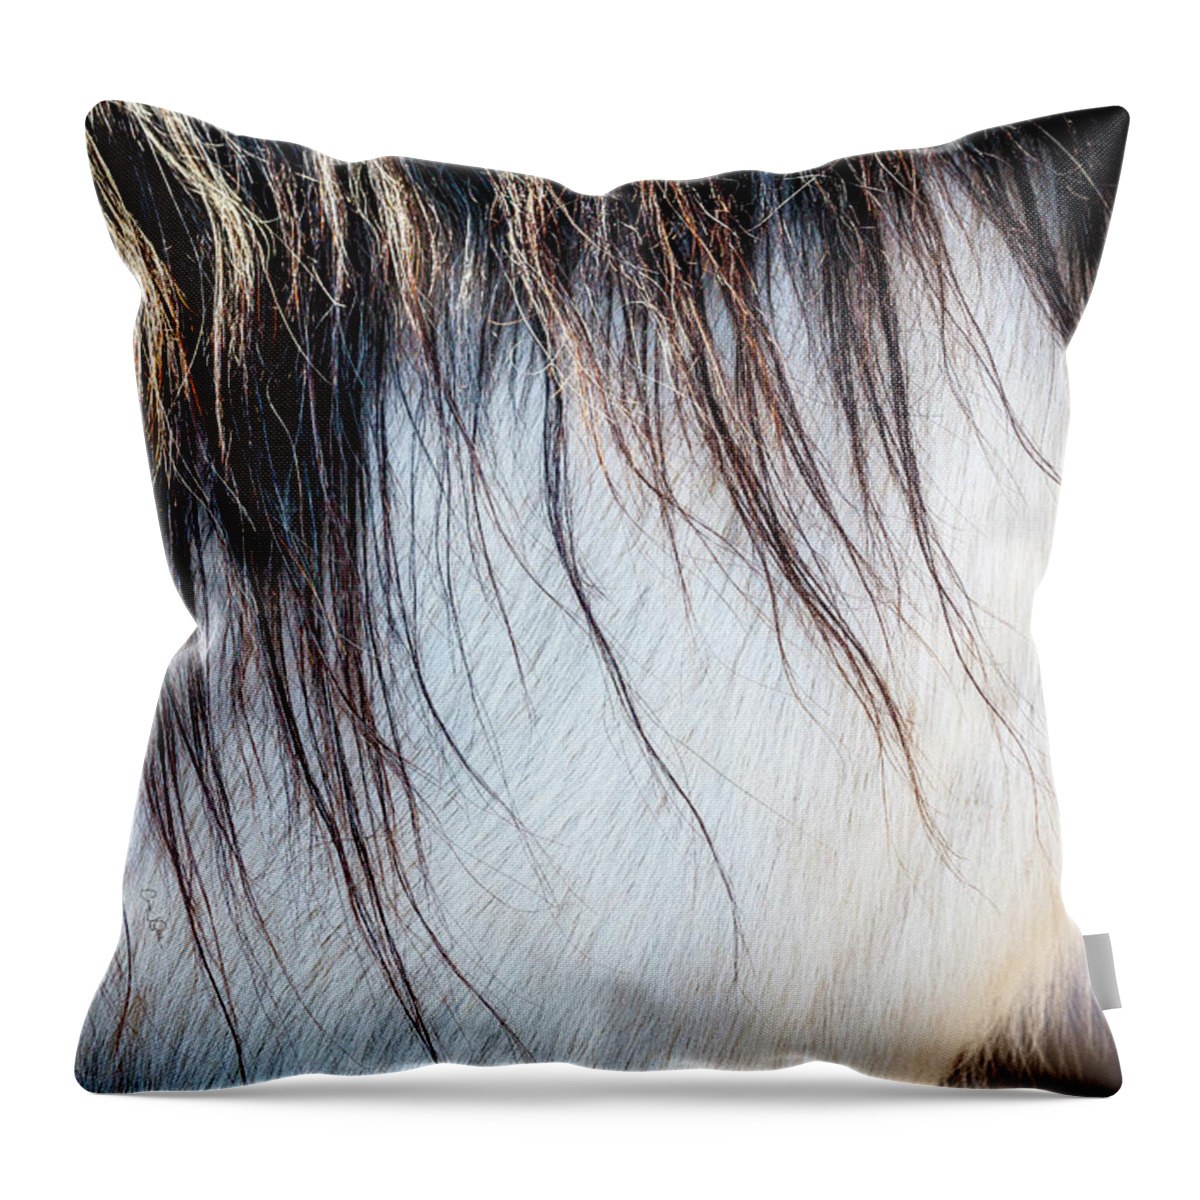 I Love The Beauty Of The Outdoors And Its Natural Wildlife. This Wild Horse Was Shot In The Pryor Mountain Wild Horse Range. Throw Pillow featuring the photograph Wild Horse No. 5 by Craig J Satterlee